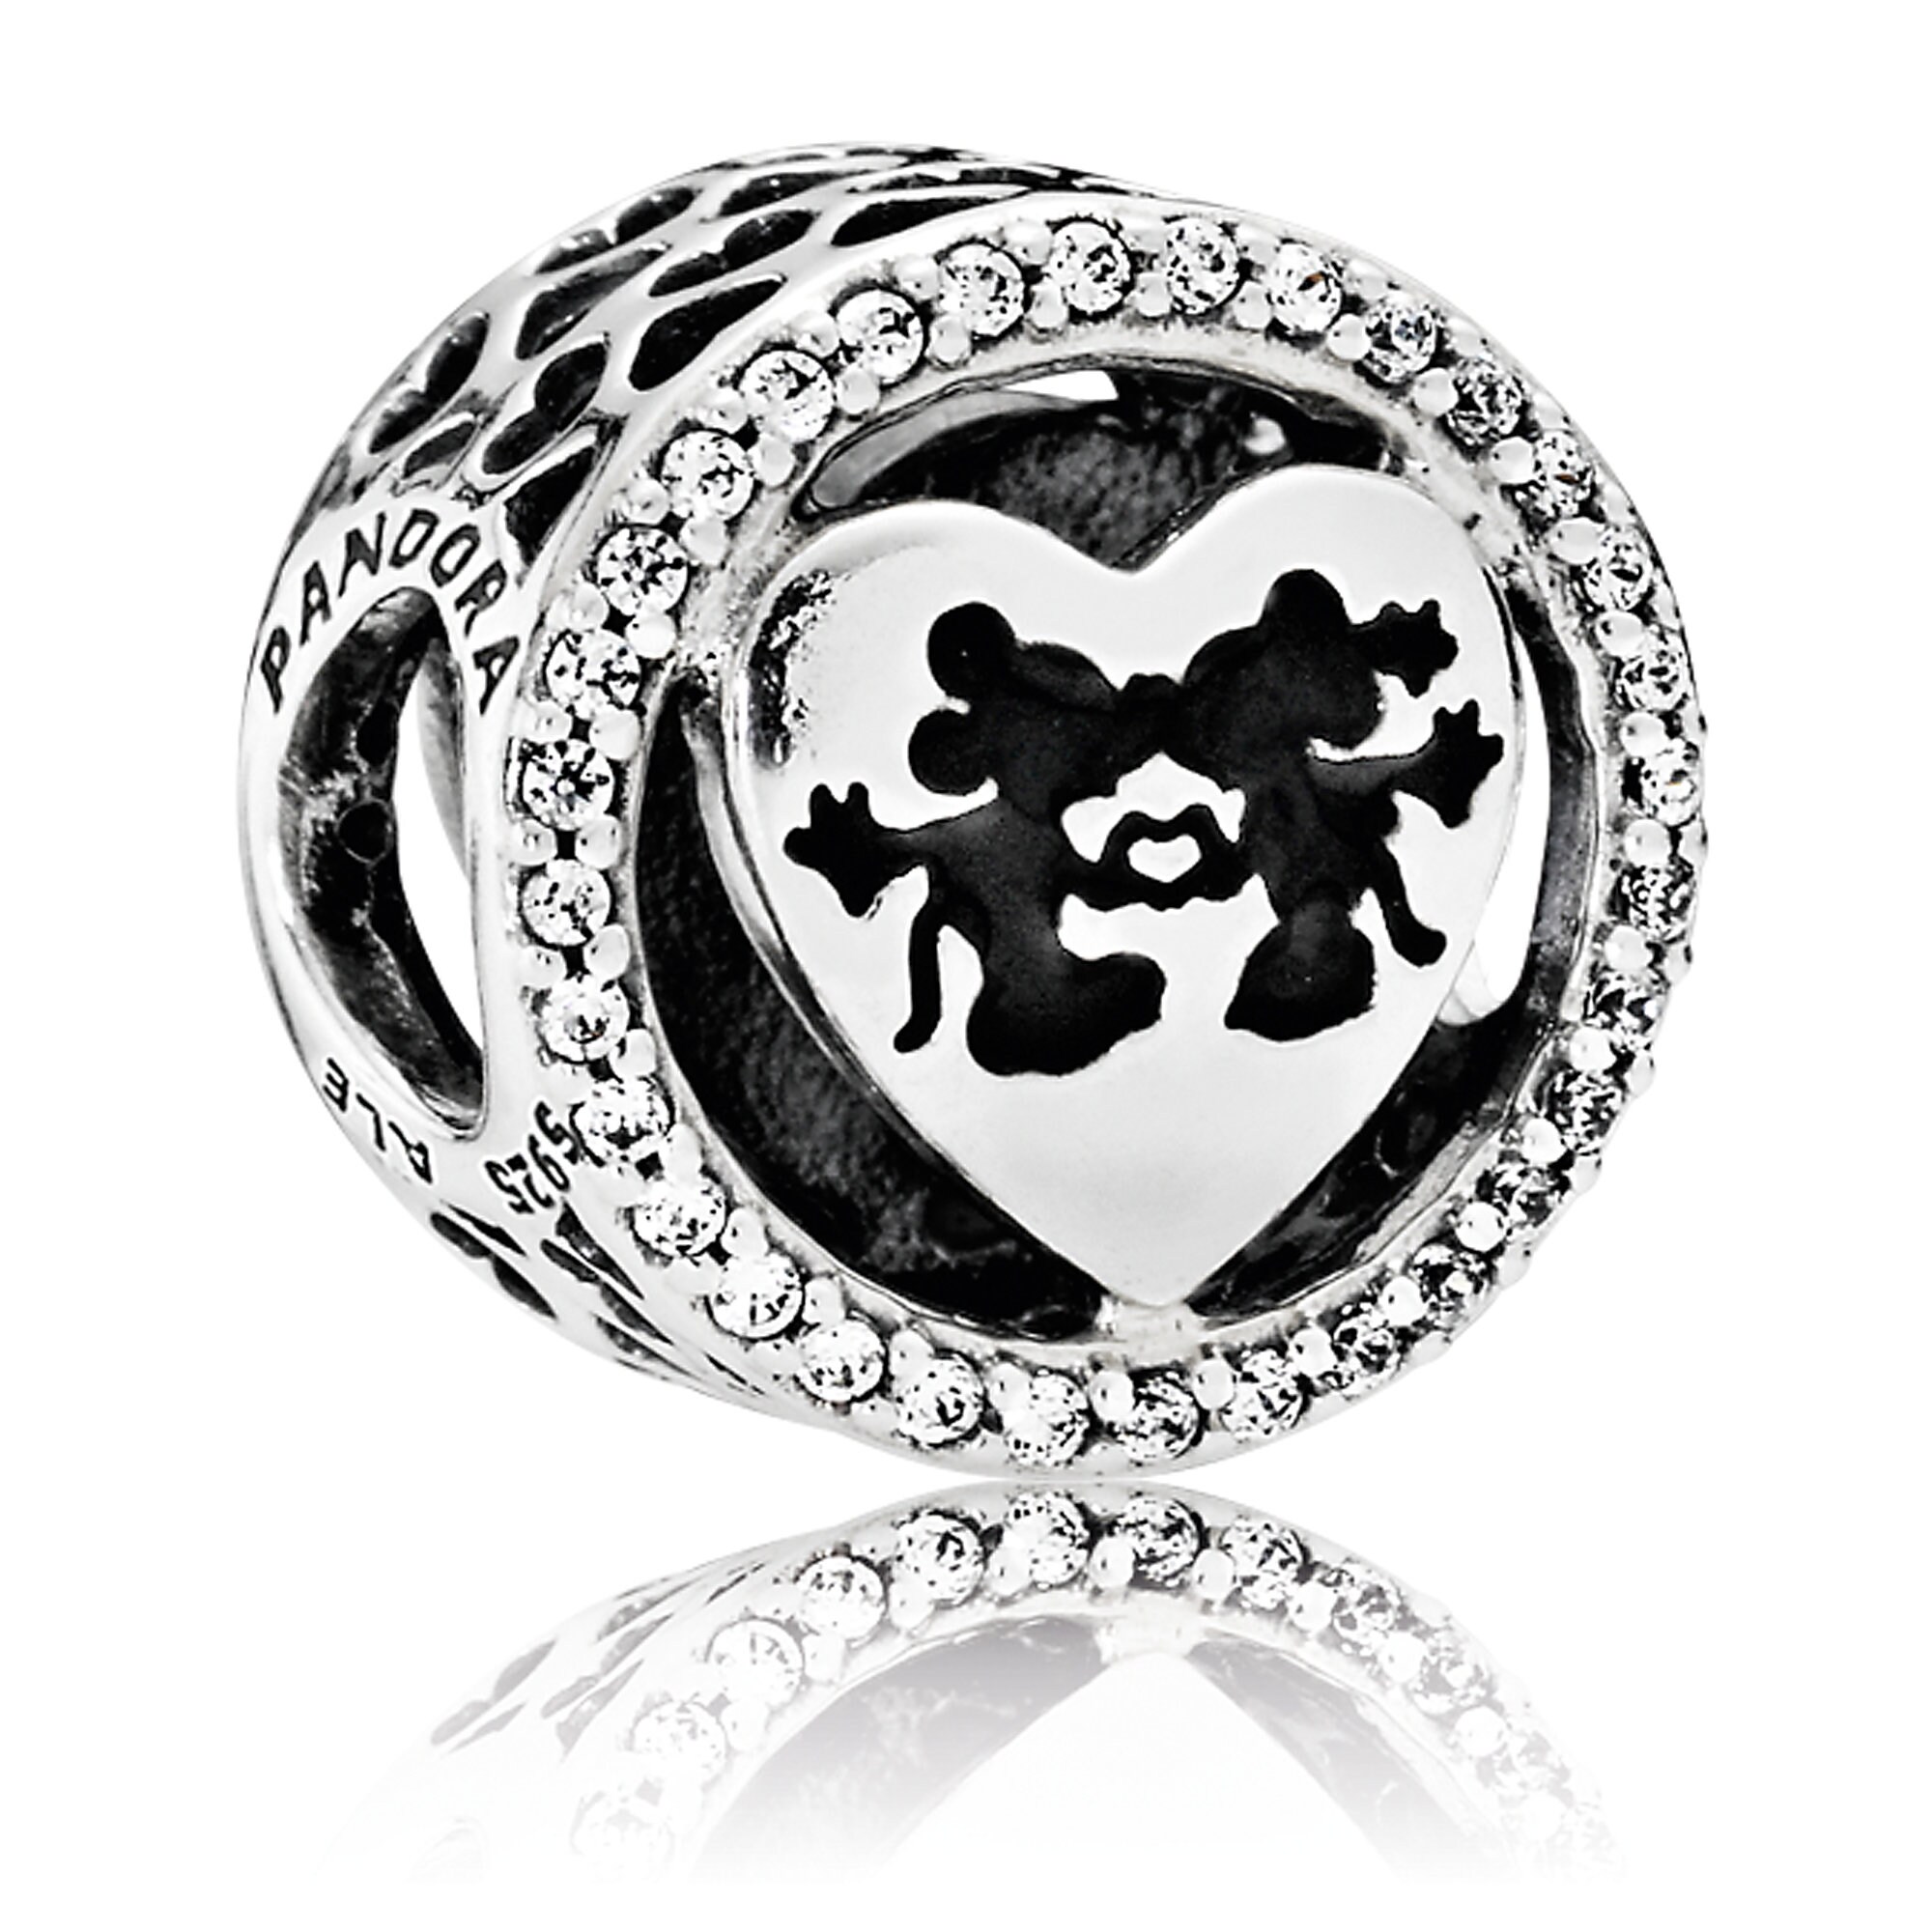 Mickey and Minnie Mouse Sweetheart Charm by Pandora Jewelry